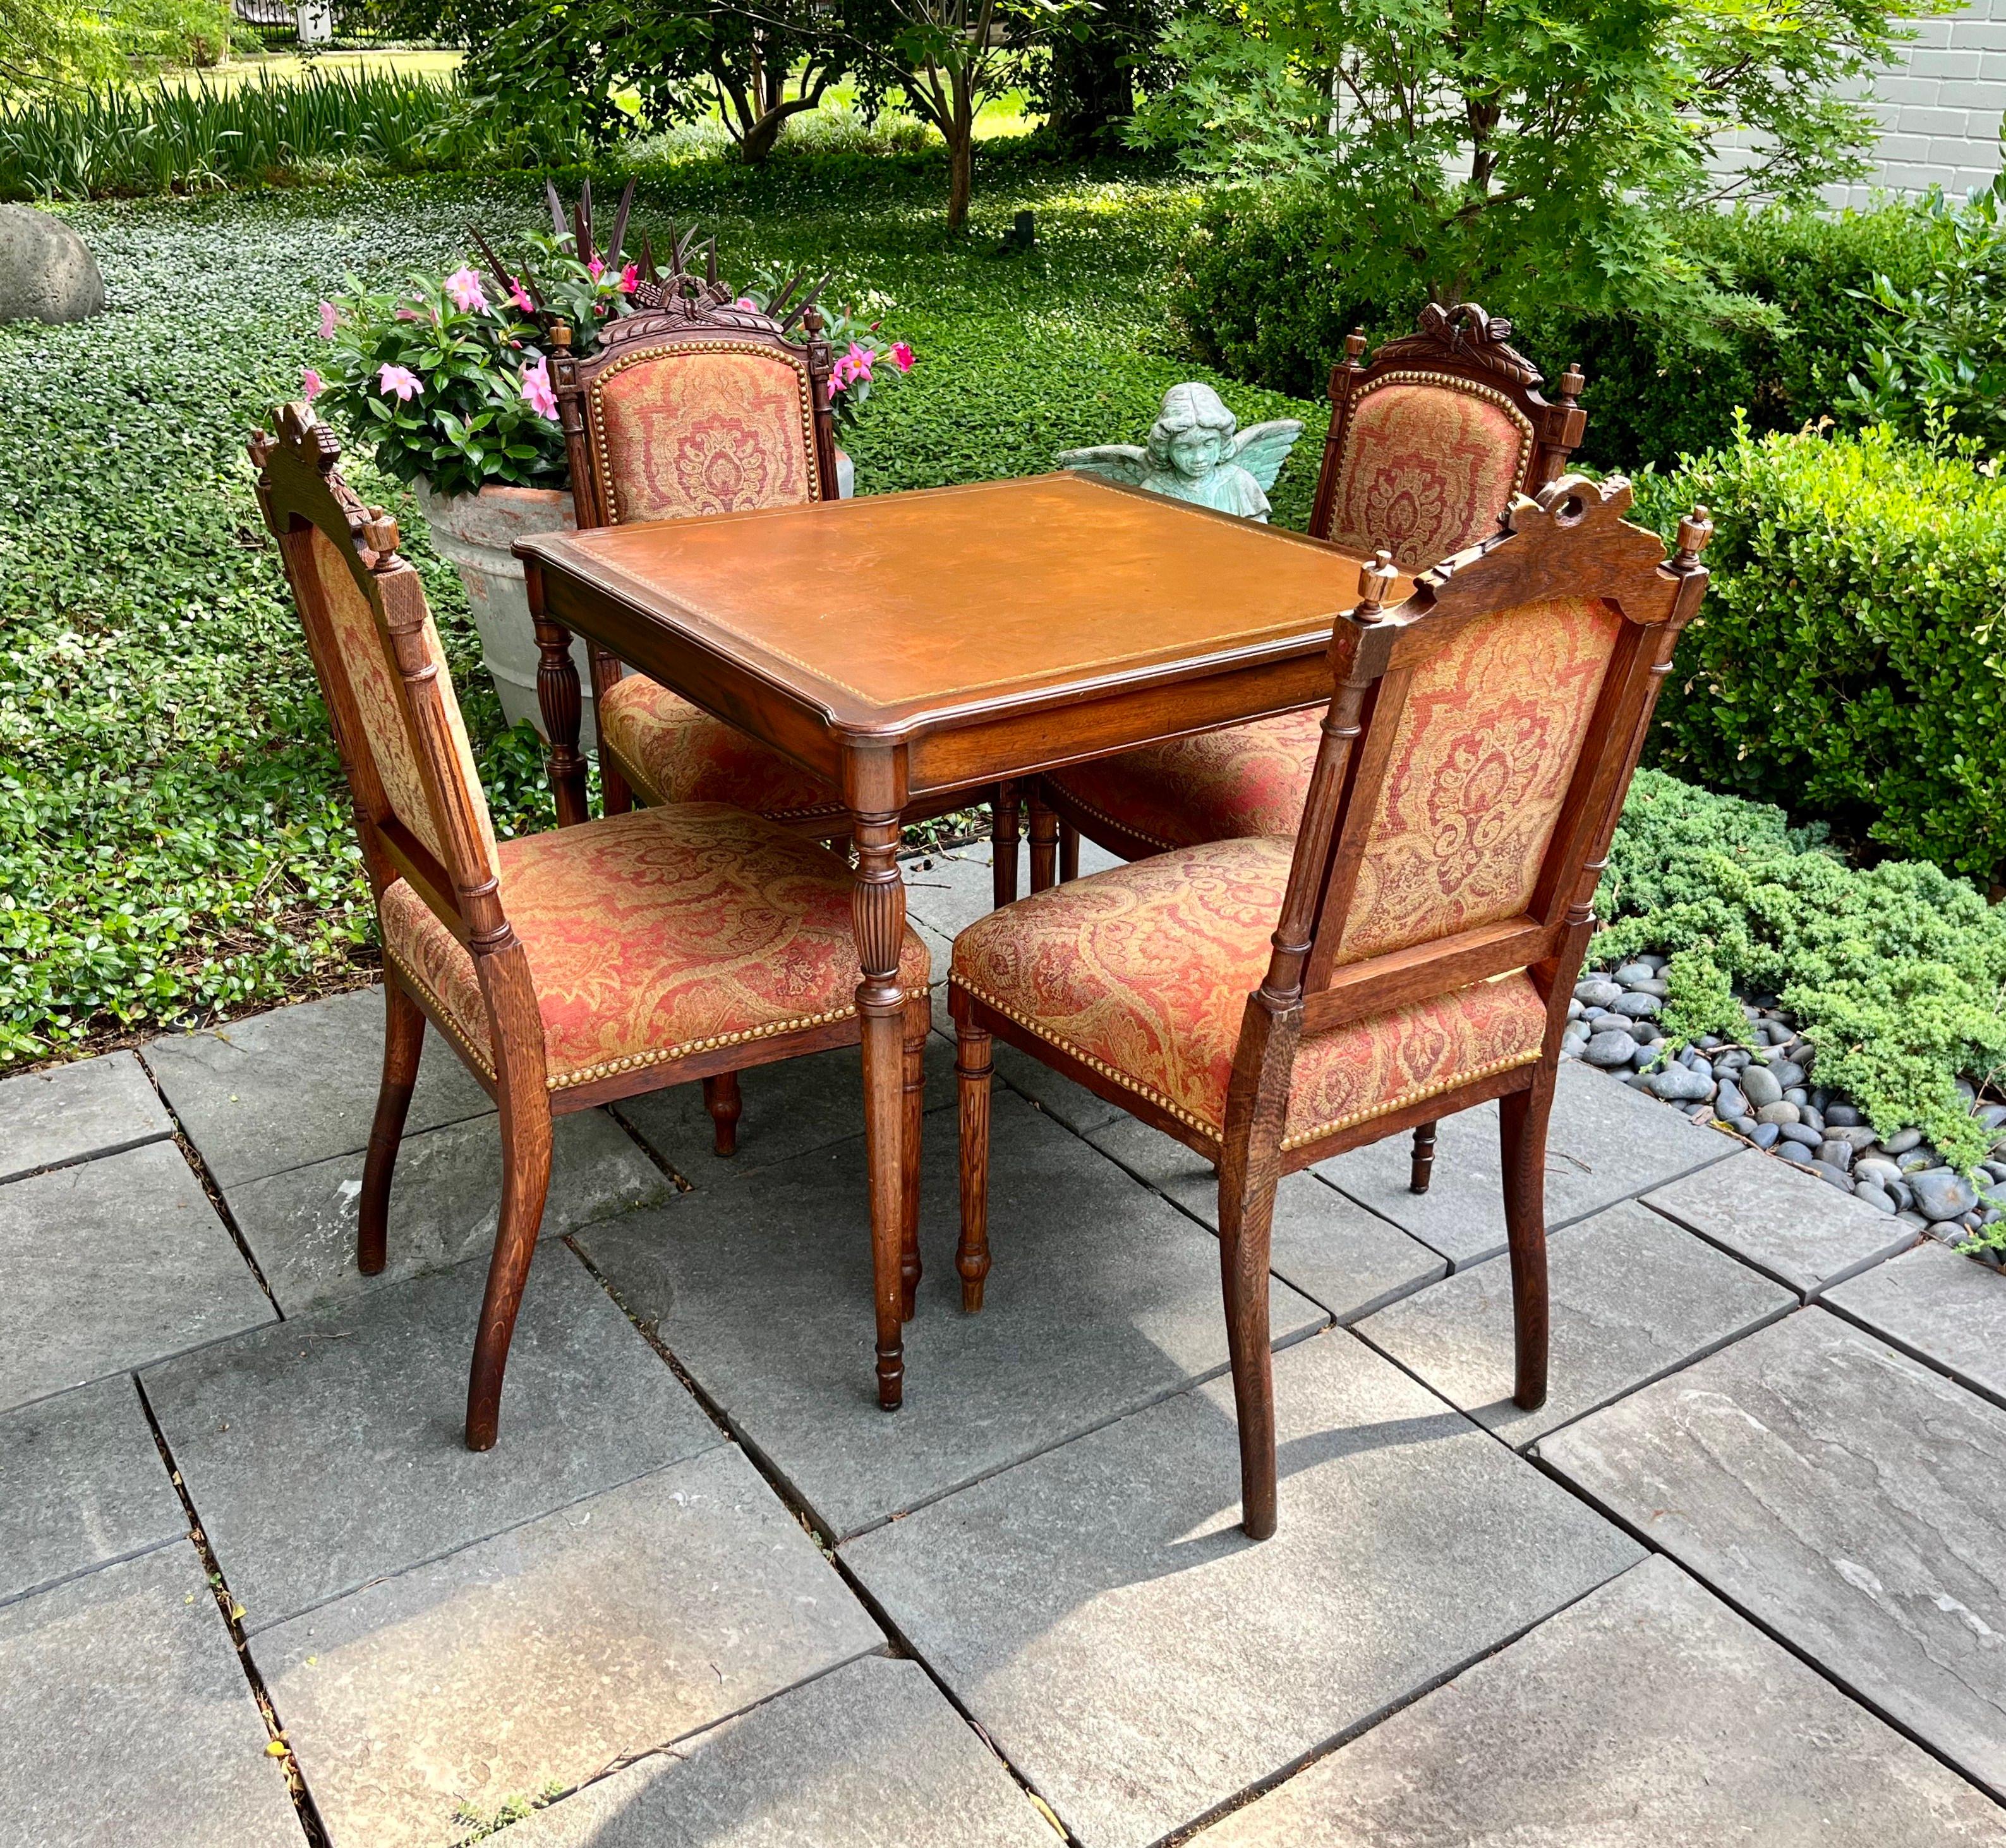 This fine set of chairs and matching game table would be a beautiful addition to a living room, study, or game room. The antique Louis XVI style chairs, crafted in France circa 1910, are carved of walnut with intricate detail. Each chair stands on